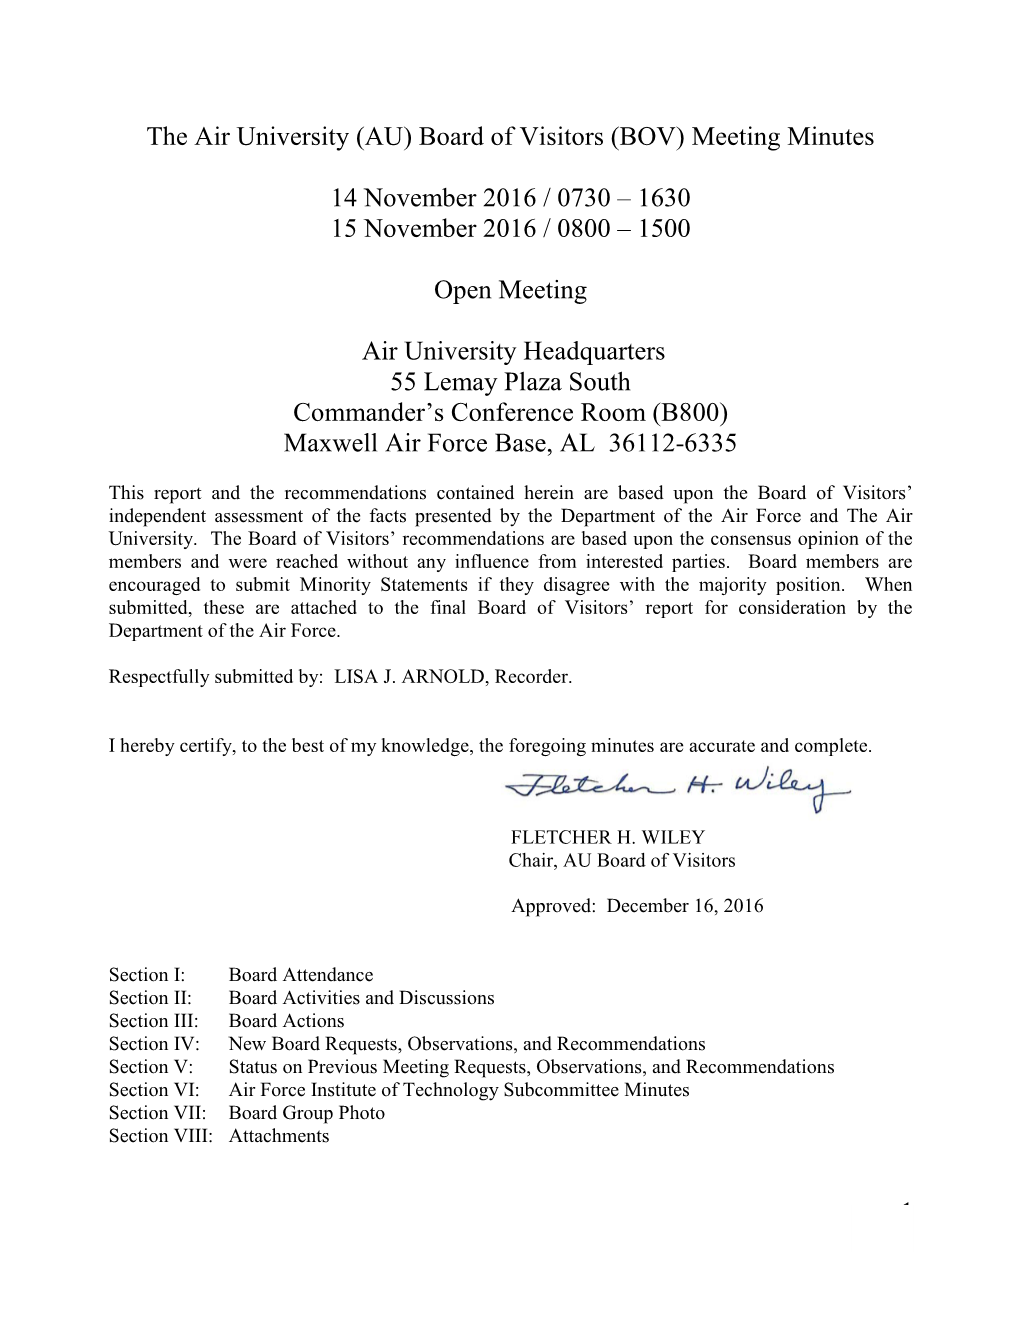 The Air University (AU) Board of Visitors (BOV) Meeting Minutes 14